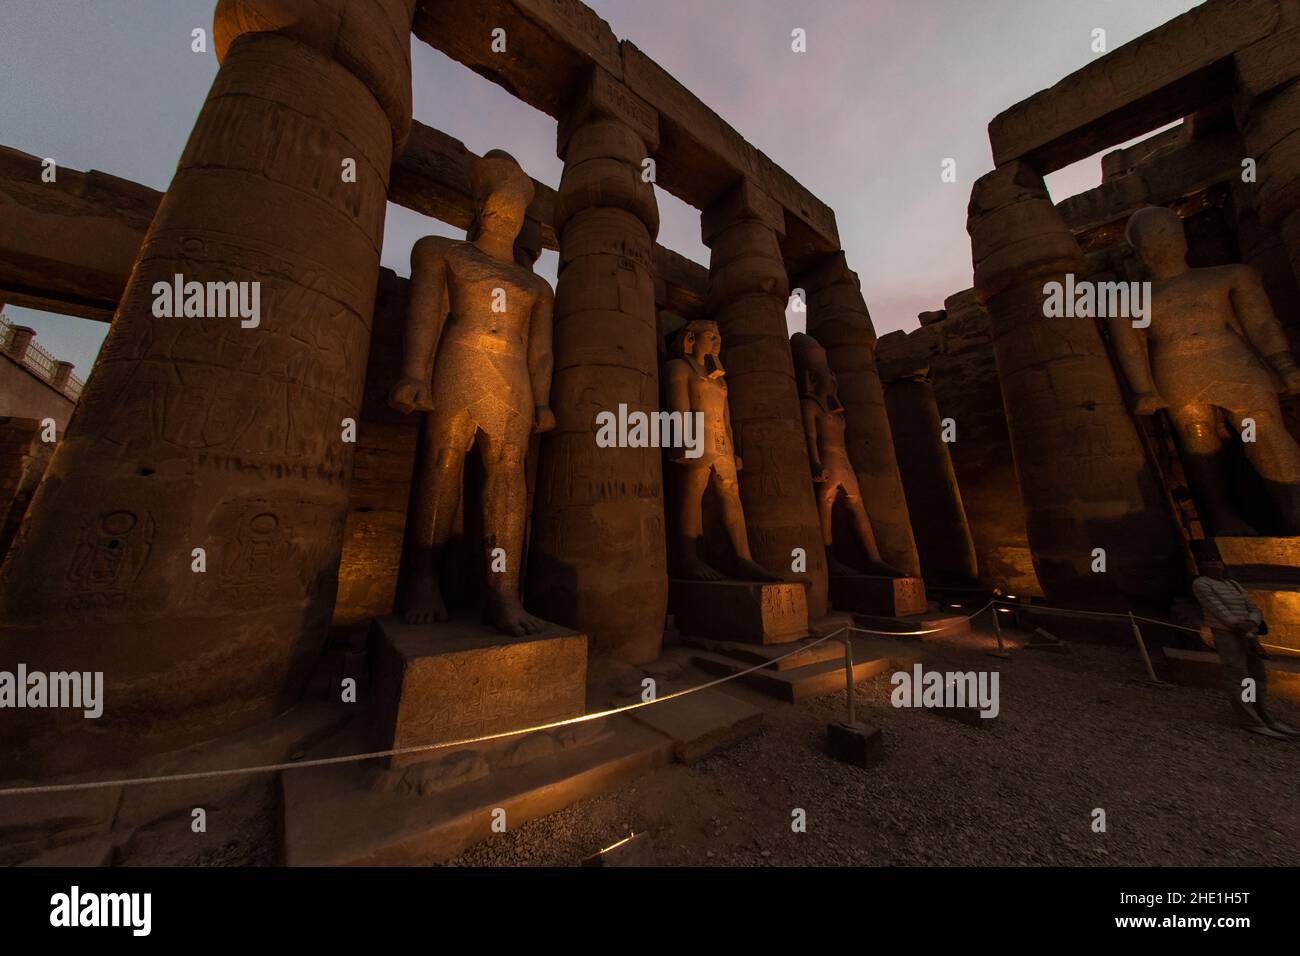 Statues and pillars at Luxor temple in Egypt illuminated by lights in the evening as darkness falls for a beautiful and dramatic effect. Stock Photo